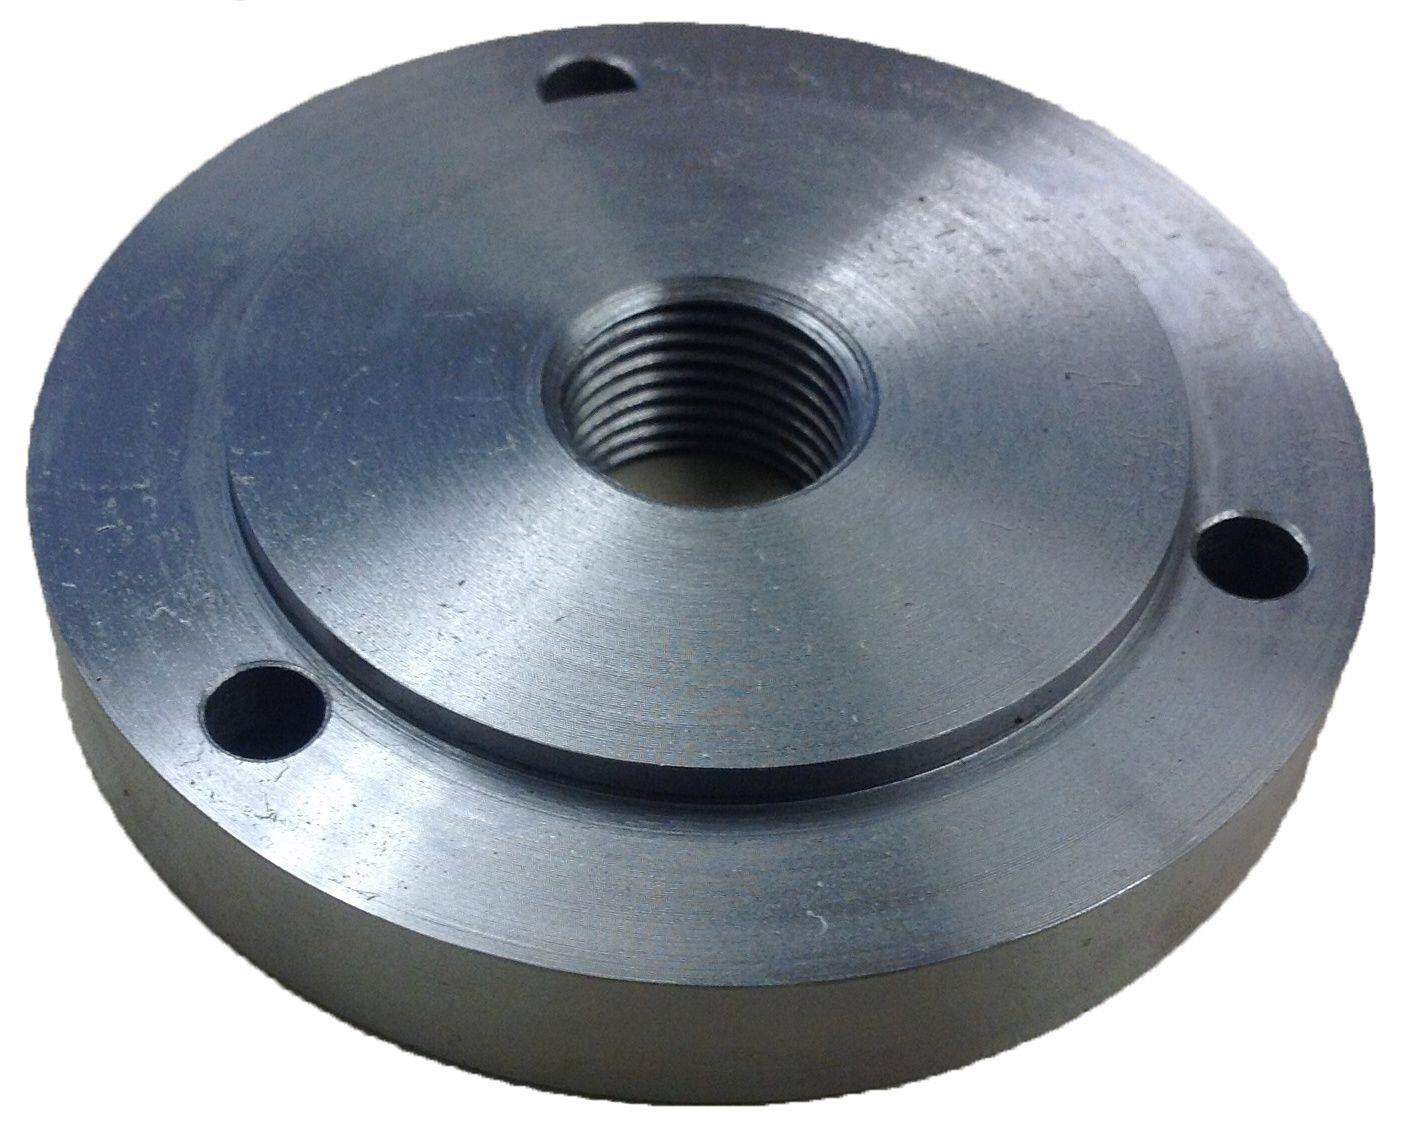 4" 1"-10 THREADED BACKPLATE FOR 3 JAW CHUCKS  (3900-3211)